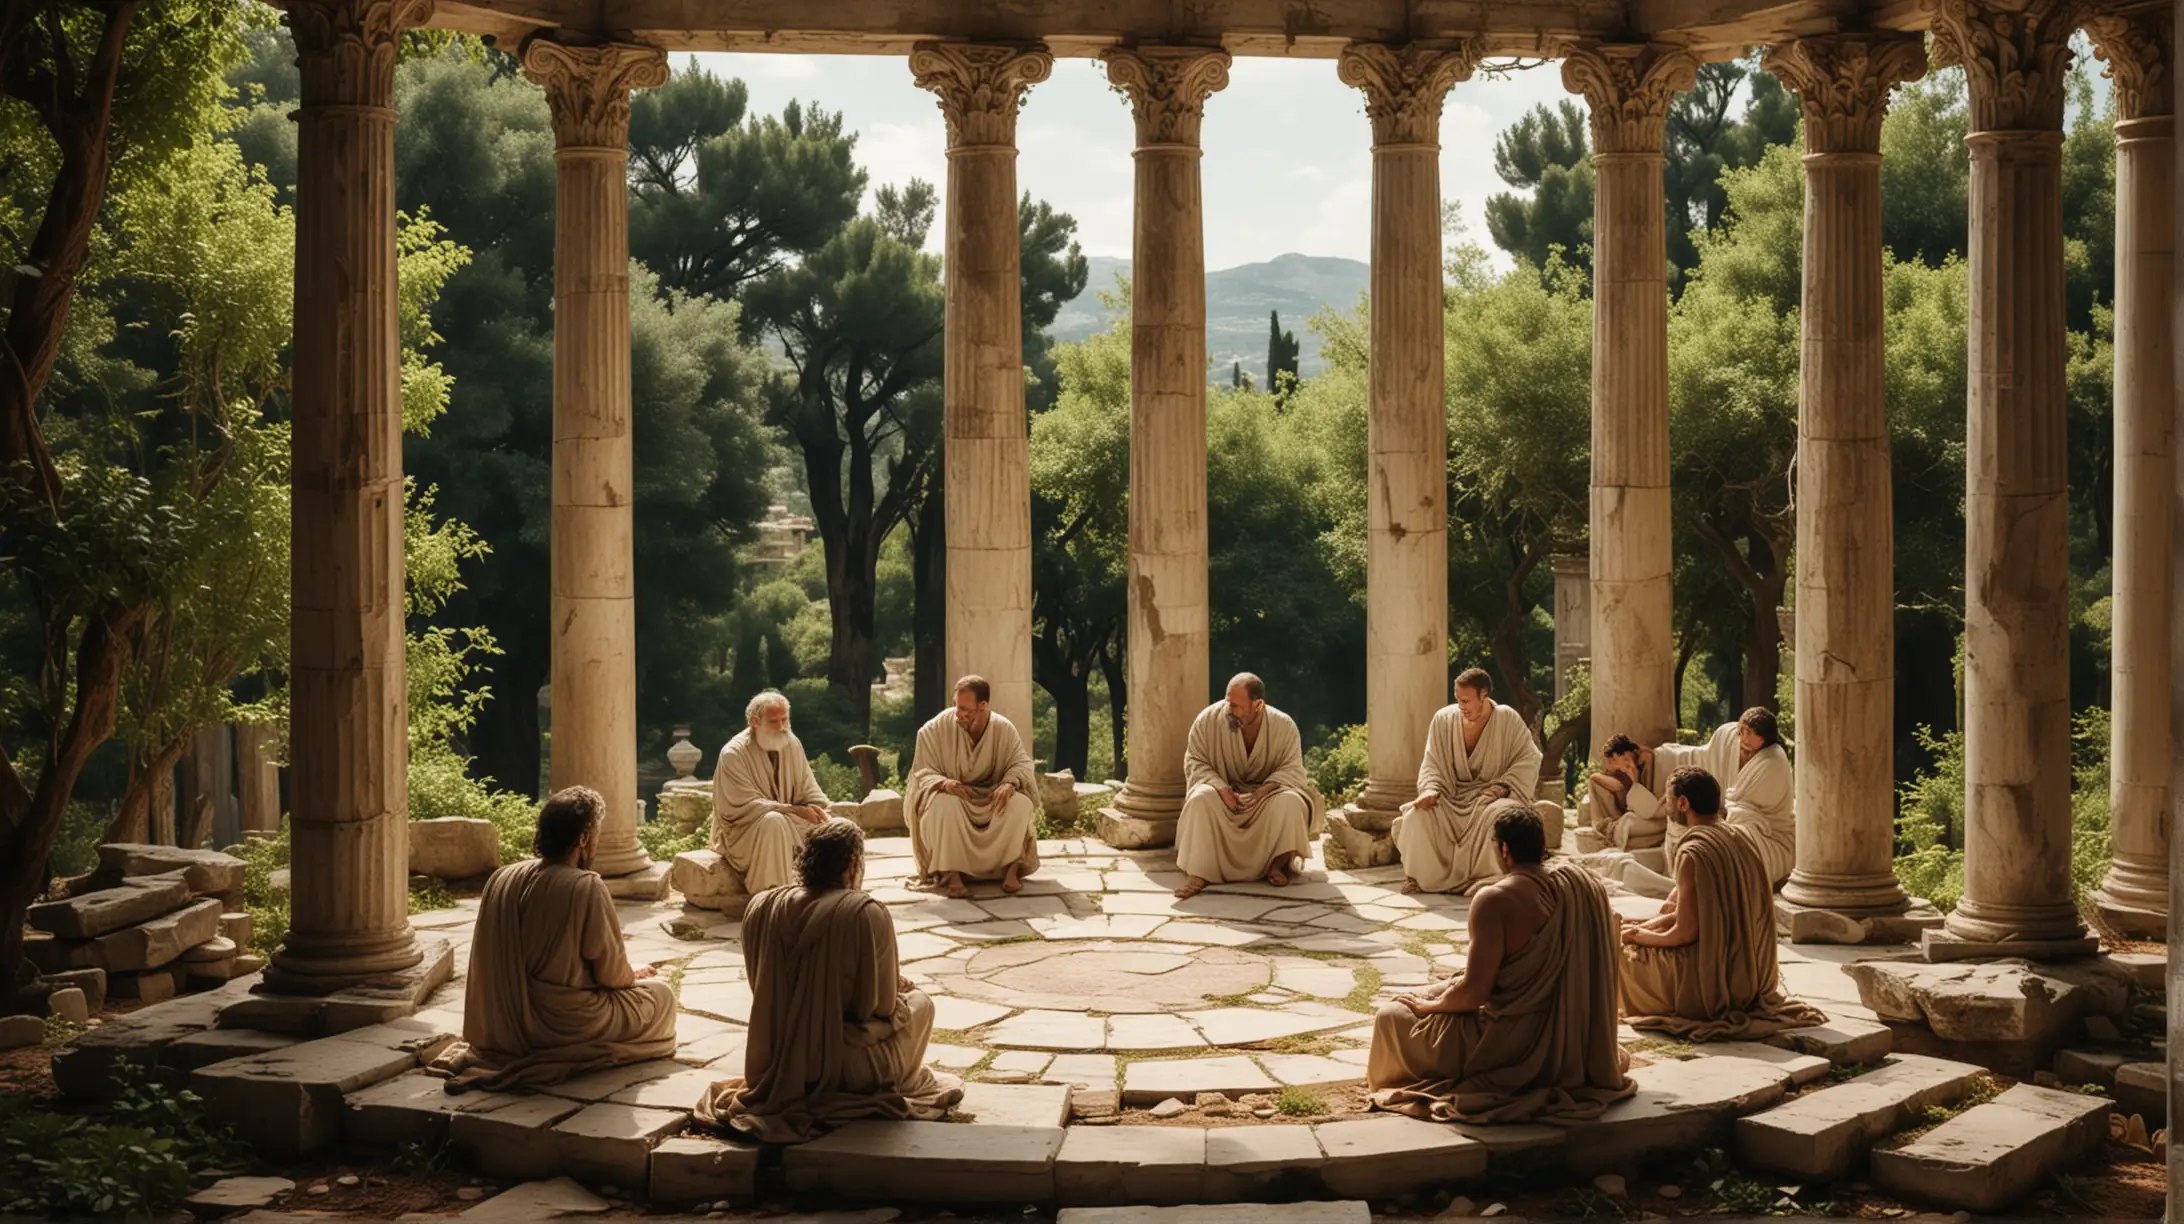 Visualization Prompt: Visualize a scene where a group of Stoic philosophers is engaged in deep contemplation, surrounded by ancient Greek architecture and lush greenery.
Image Description: In the center of the image, we see a gathering of Stoic philosophers seated in a circle, their expressions serene and focused. Behind them, towering marble columns rise into the sky, casting long shadows on the ground below. Vines climb the columns, adding a touch of natural beauty to the scene. The philosophers are dressed in simple robes, their lean and muscular builds indicative of their disciplined lifestyles. The air is filled with an aura of wisdom and tranquility as they discuss the importance of reason and logic in decision-making.